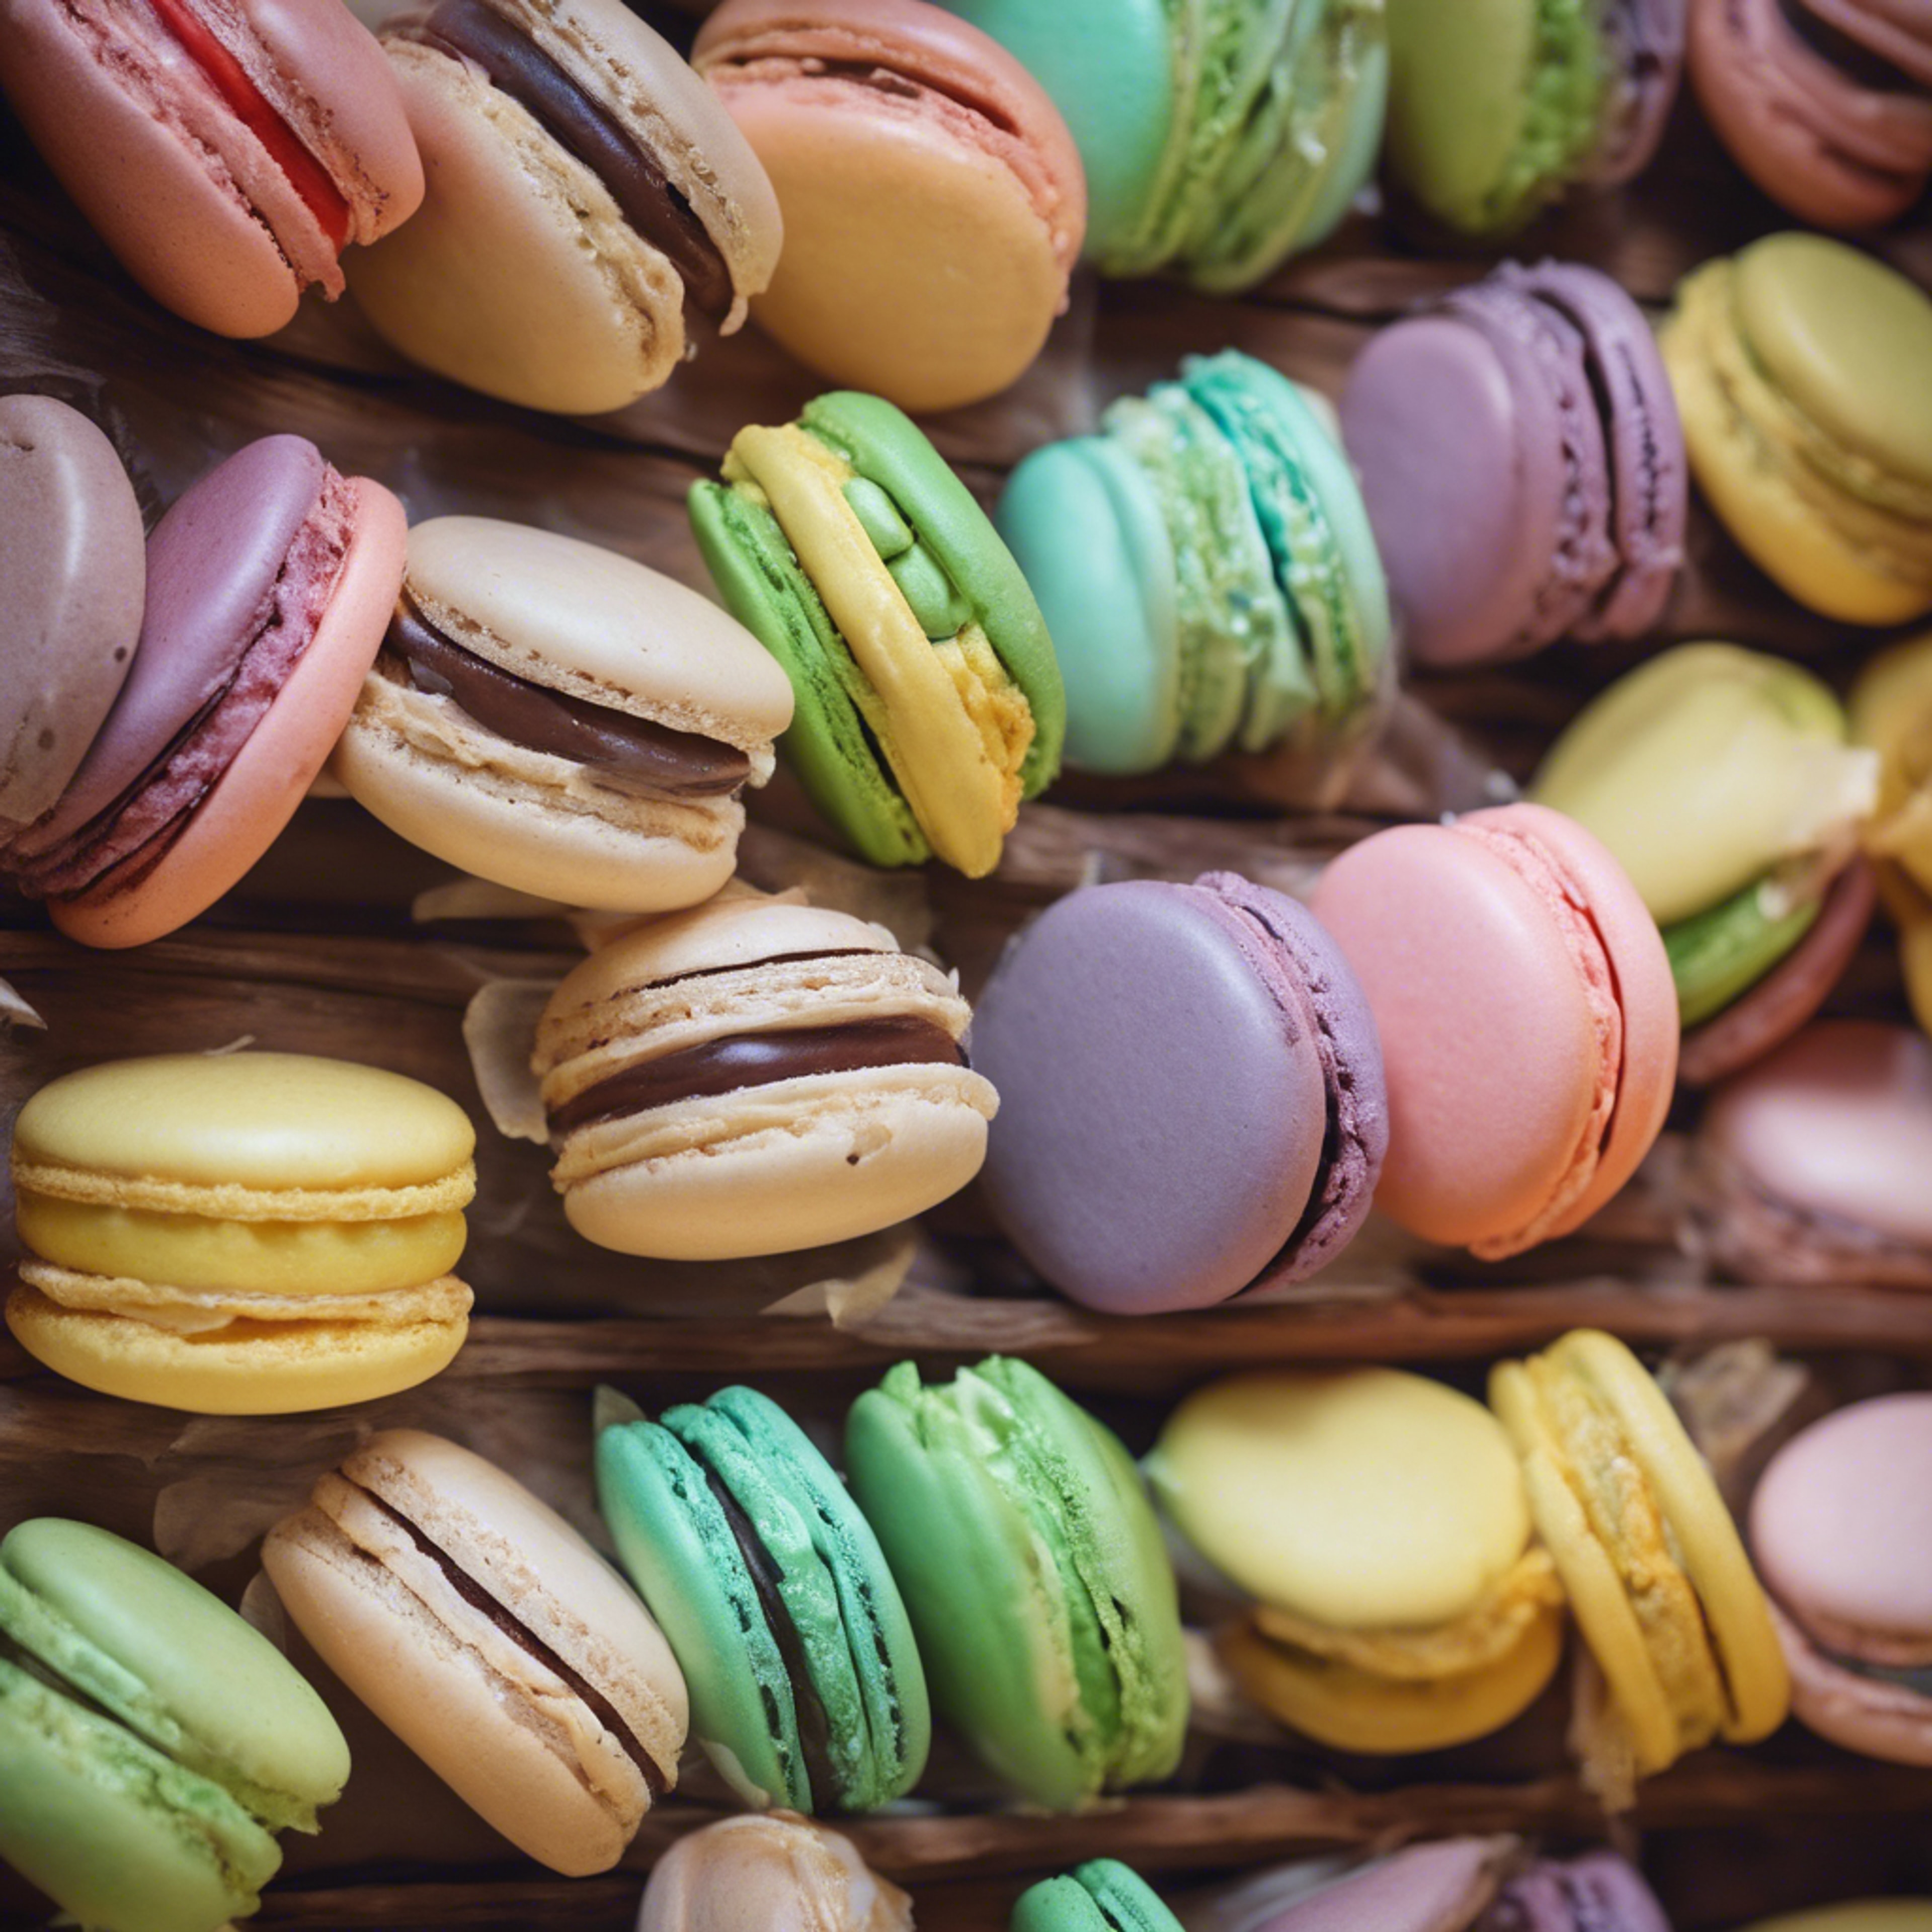 An old-fashioned nostalgic bakery displaying various colorful macarons. 牆紙[50adf48075104113b6f7]